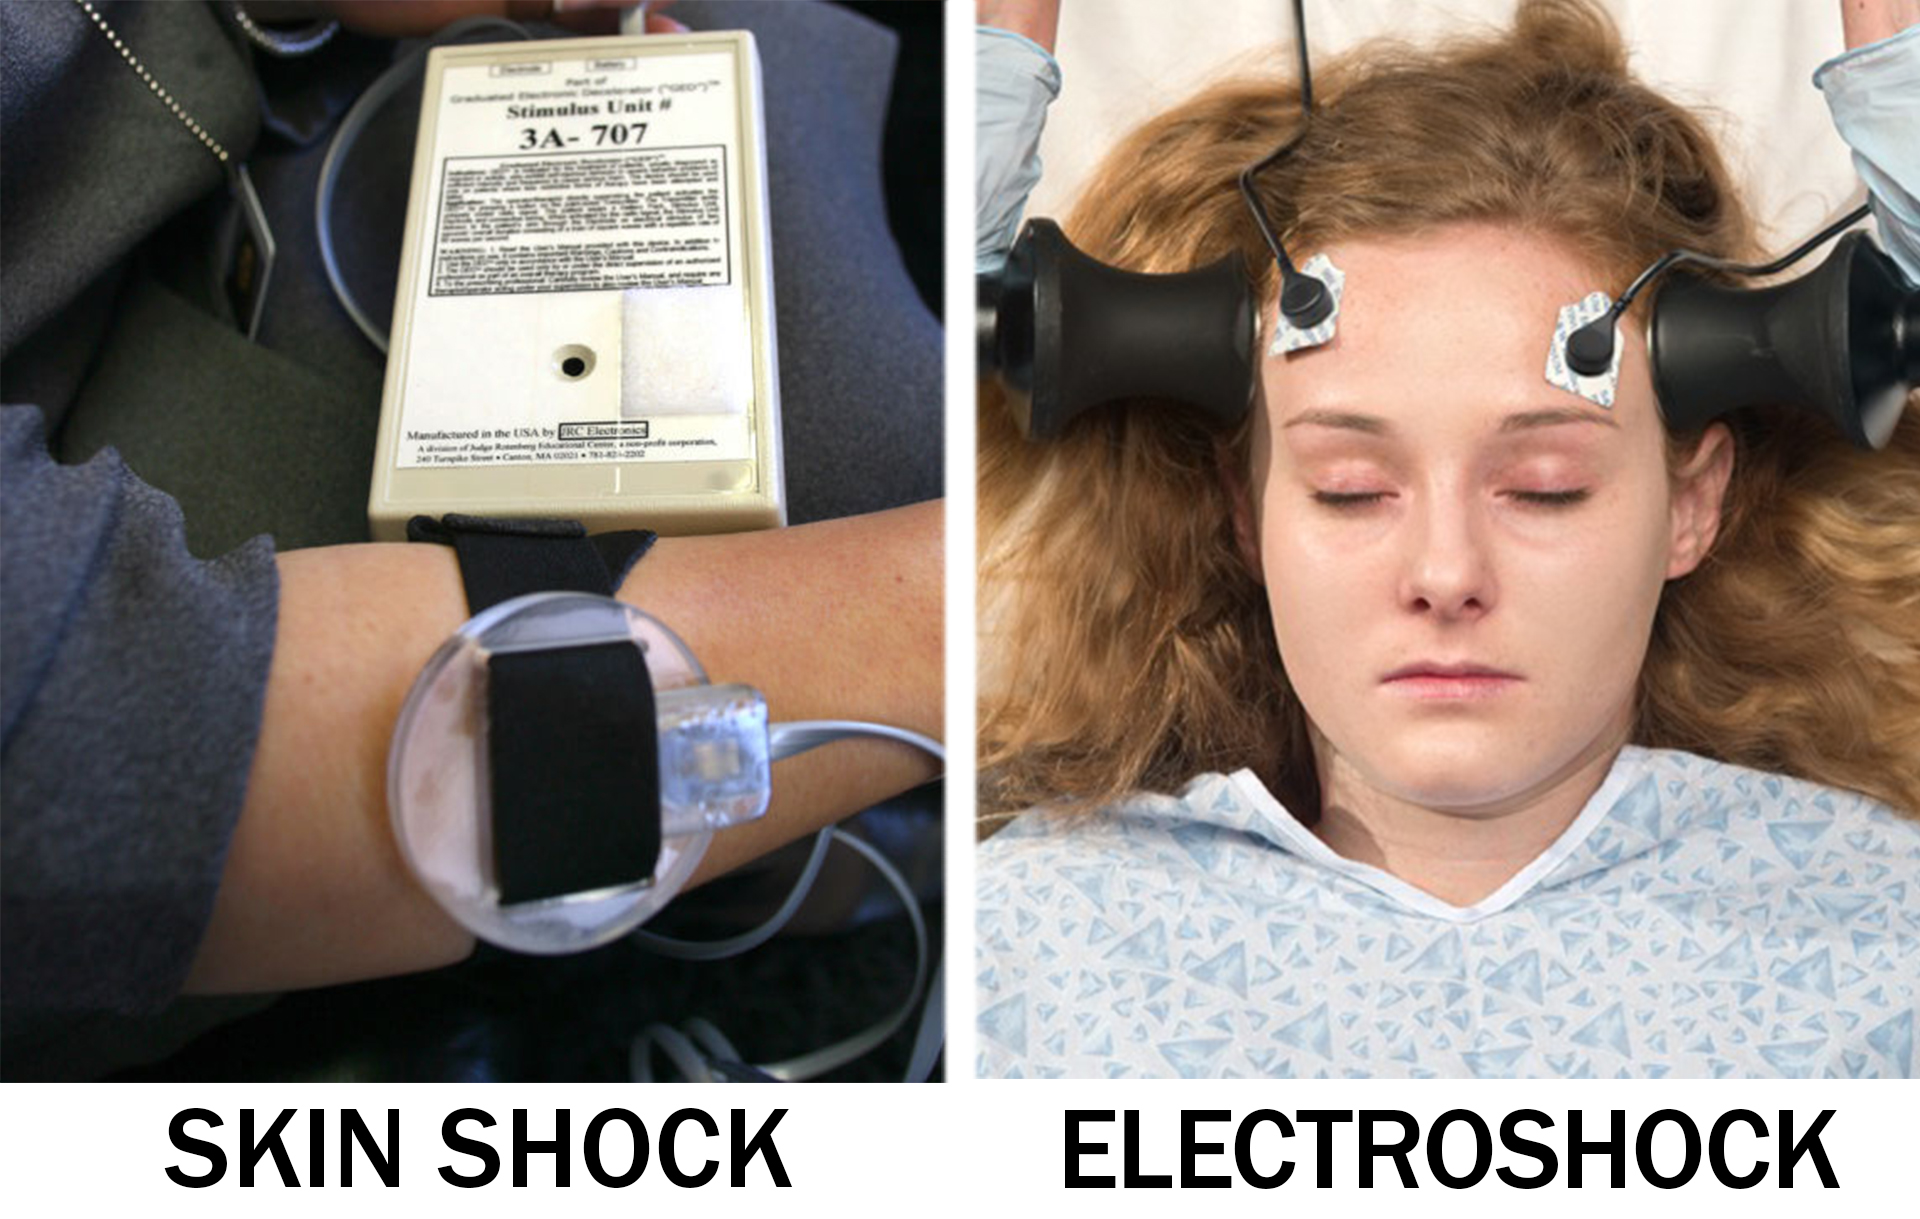 F.D.A. Is Studying the Risk of Electroshock Devices